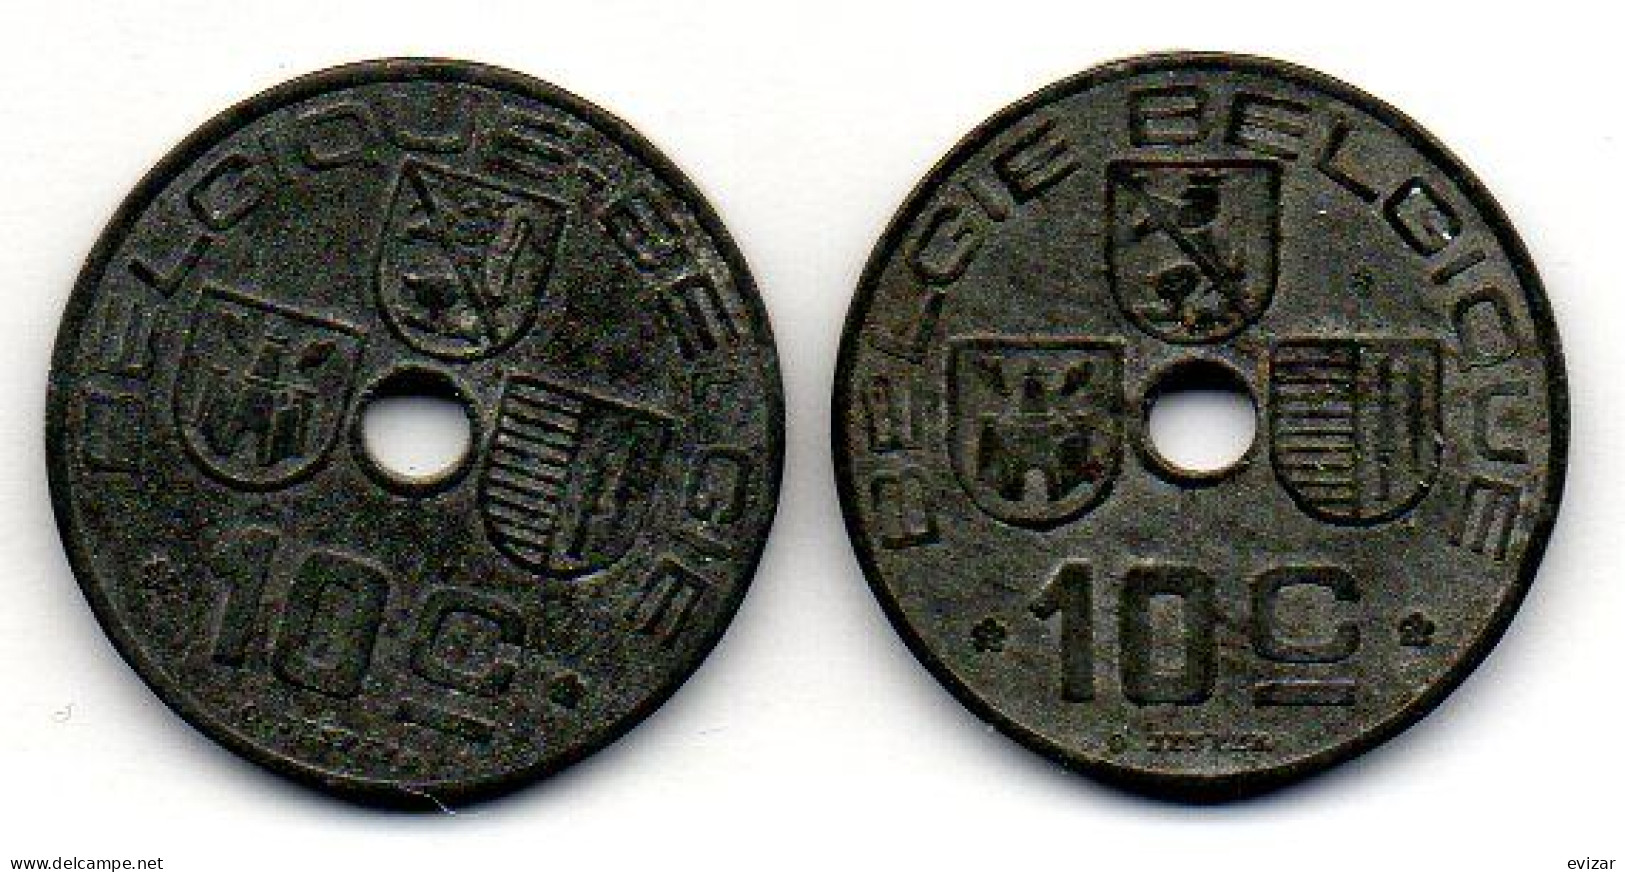 BELGIUM - GERMAN OCCUPATION WWII - Set Of Two Coins 10 Centimes, Zinc, Year 1942-44, KM #125, 126, French & Dutch Legend - 10 Centimes